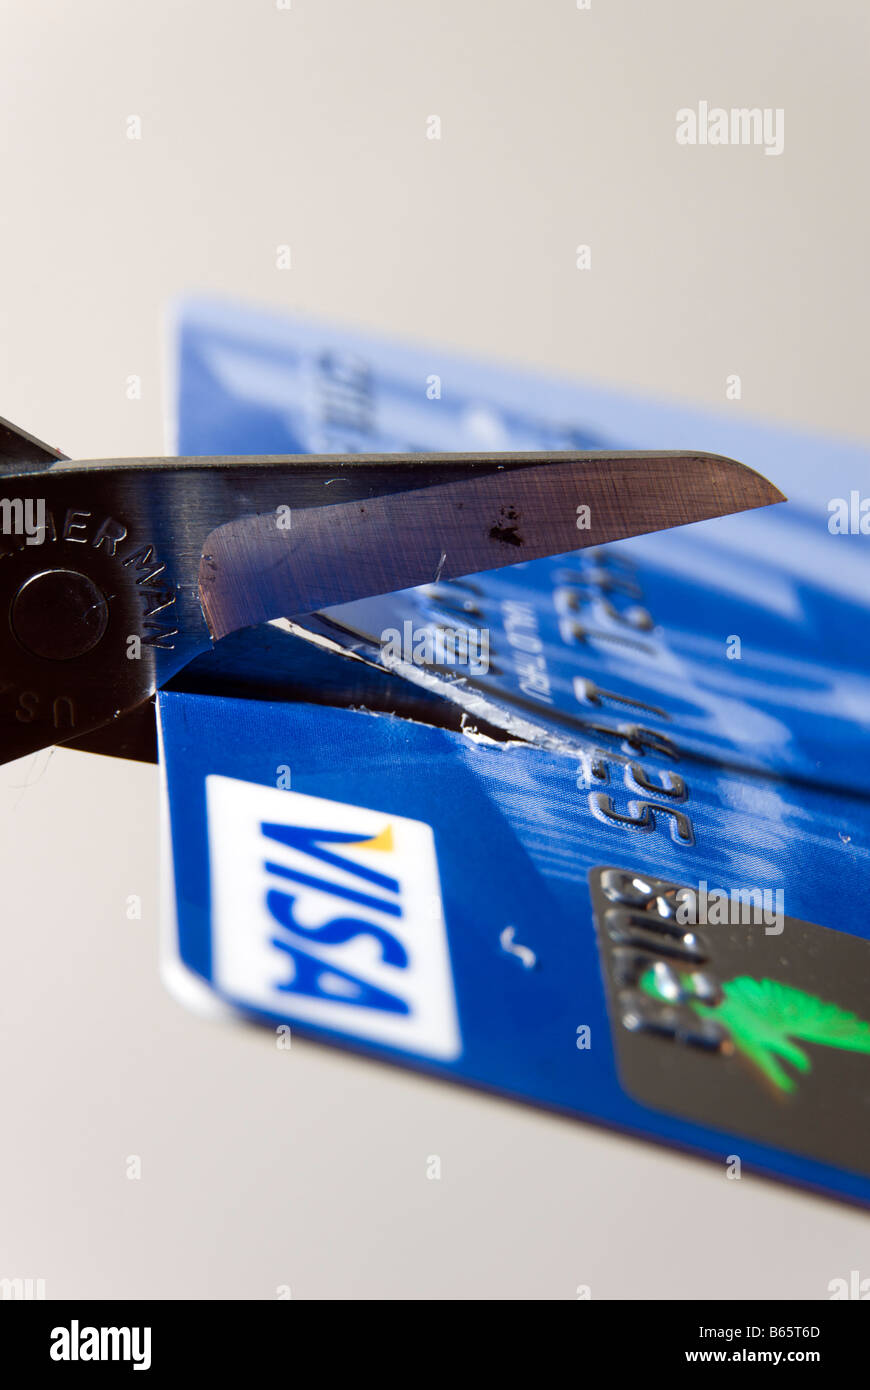 Scissors cutting up bank credit card Stock Photo